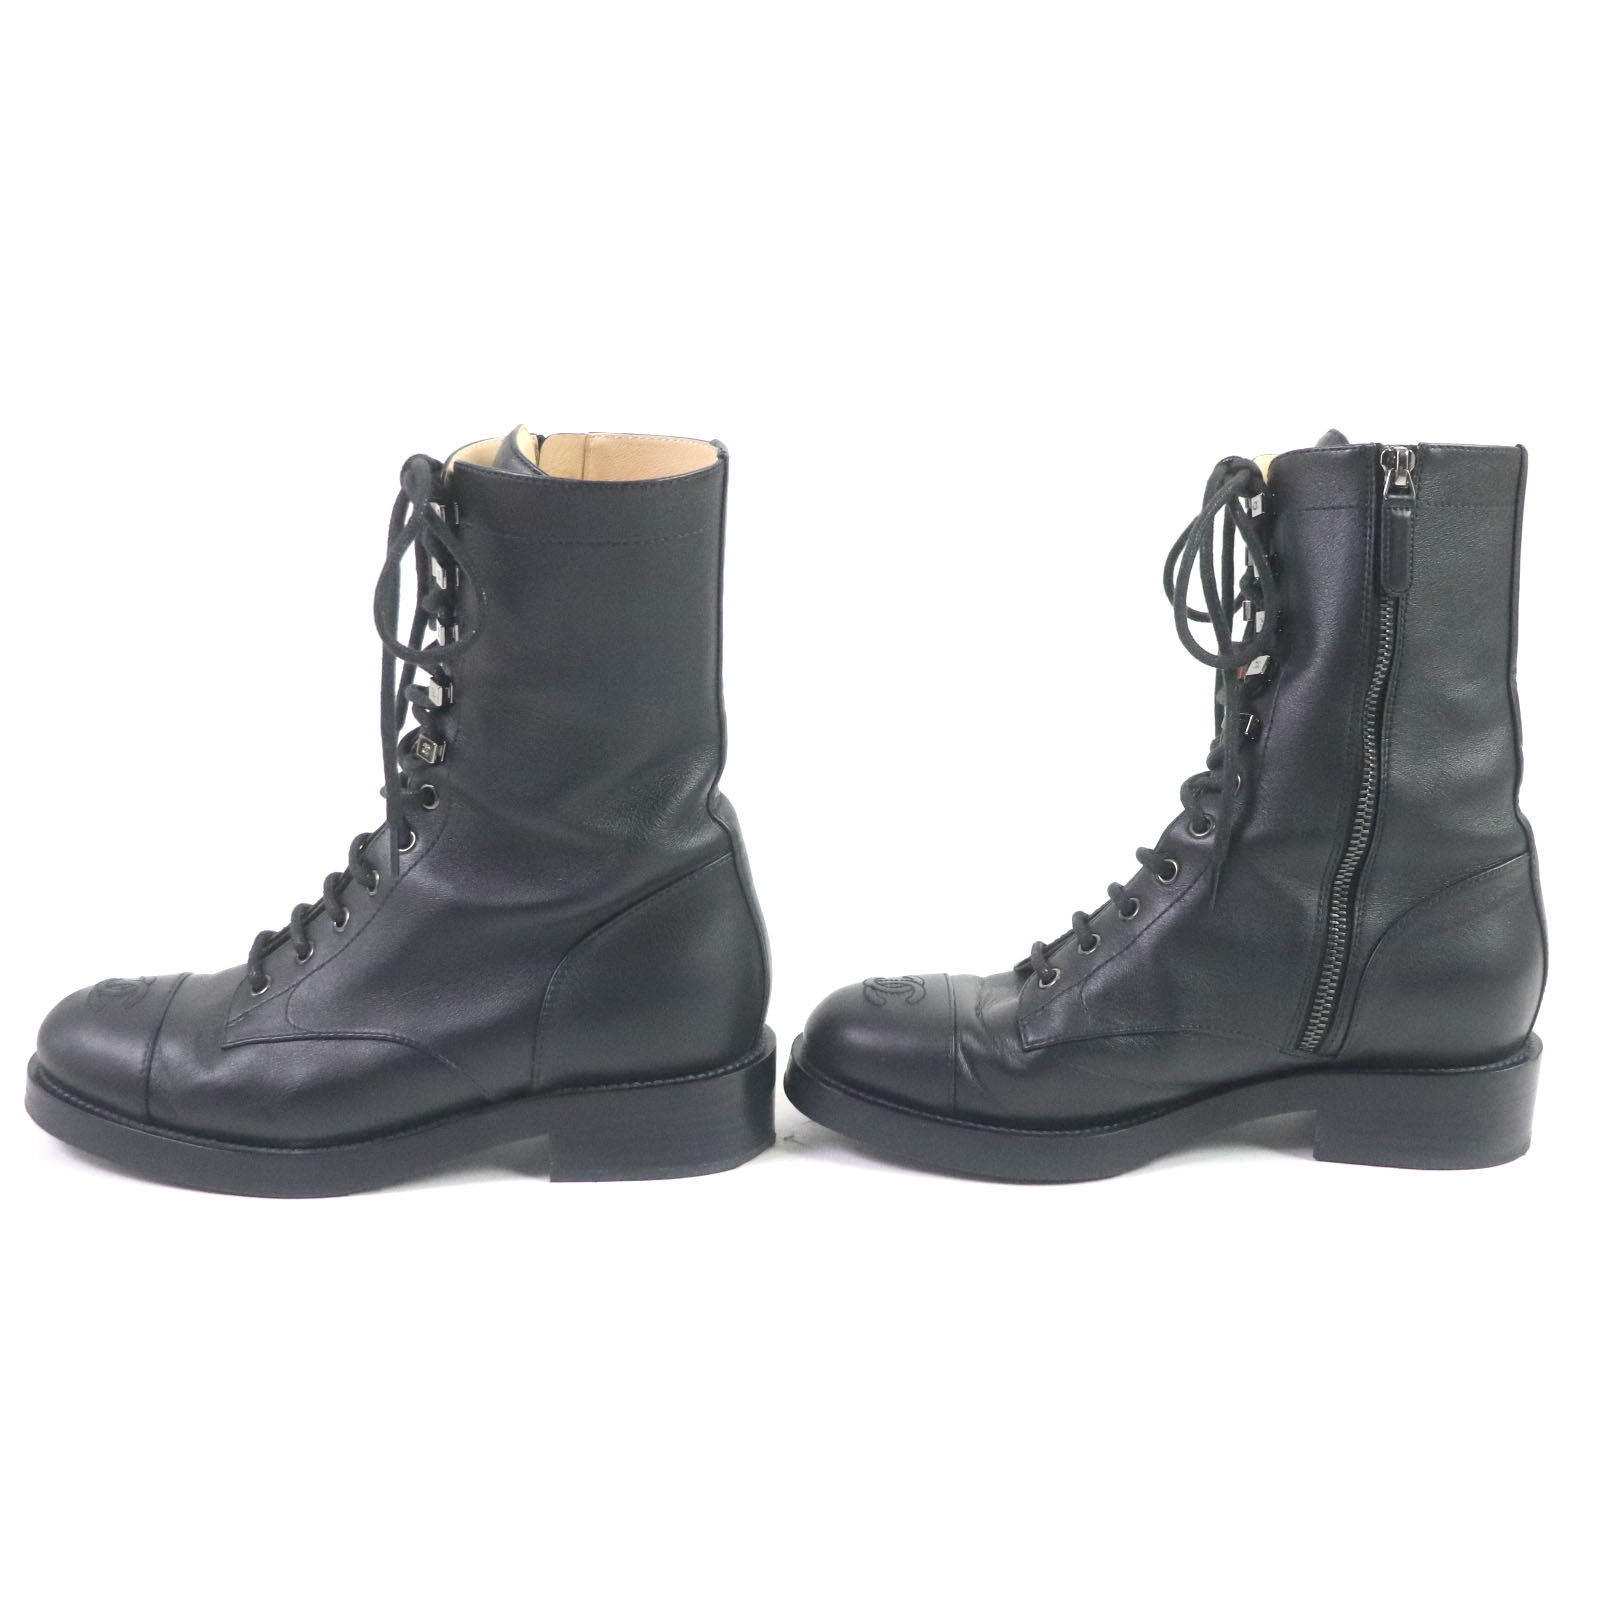  beautiful goods * Chanel G34953 leather here Mark stitch design cap tu side Zip race up ankle boots black 38.5 made in Italy 